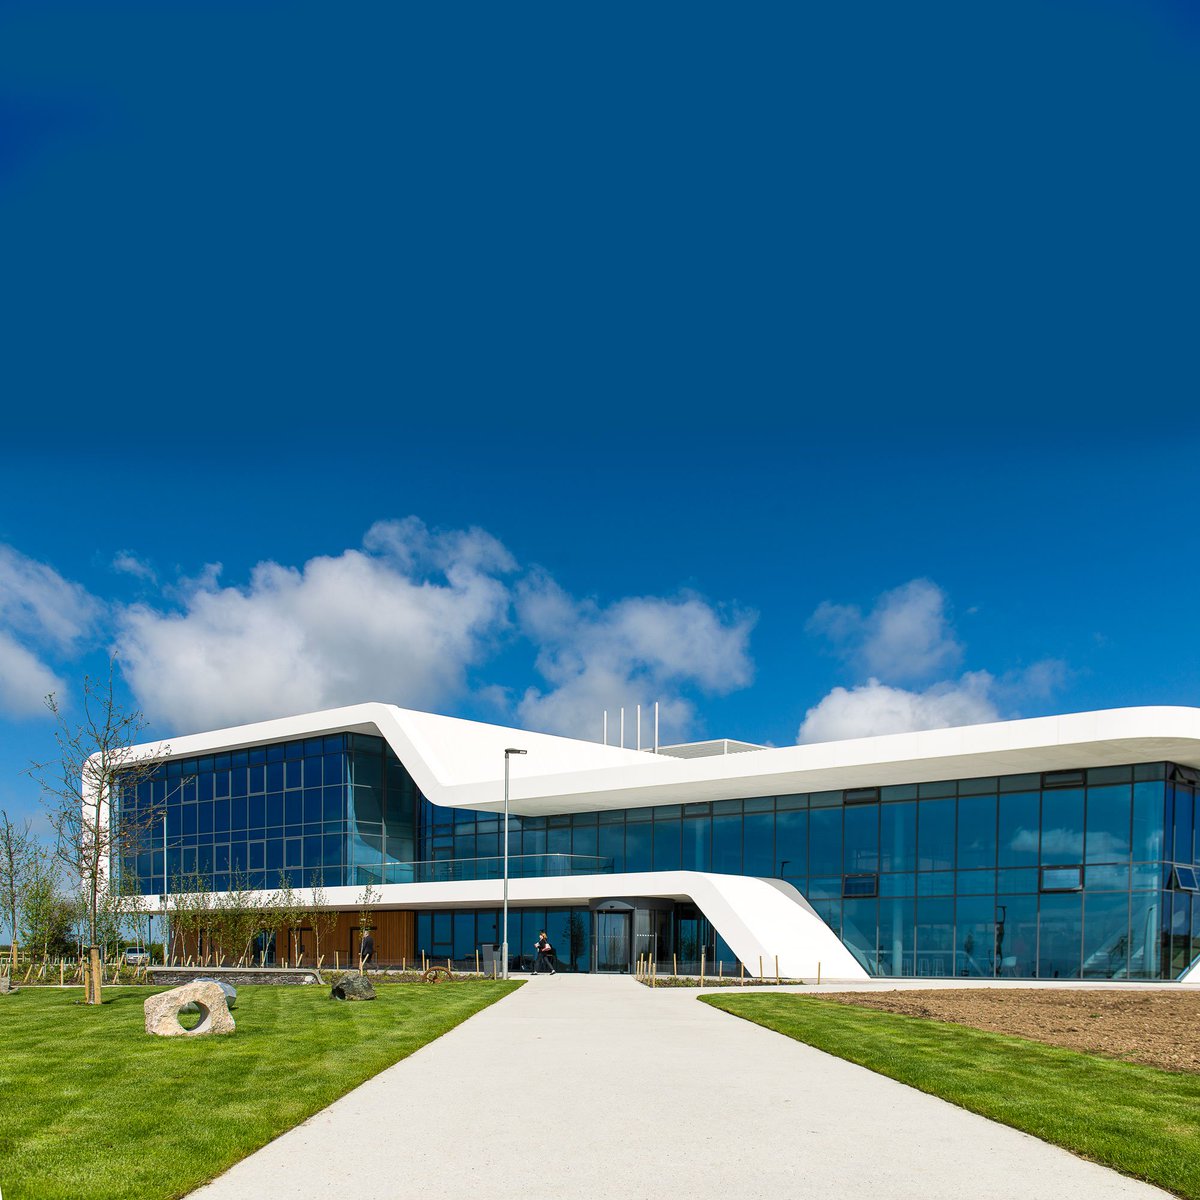 Want to be inspired today?
Stop what you're doing and view our latest case study featuring Corian!
A breathtaking project for Menai Science Park in Wales
#YouCanWithCorian
hubs.ly/H0cRKZw0